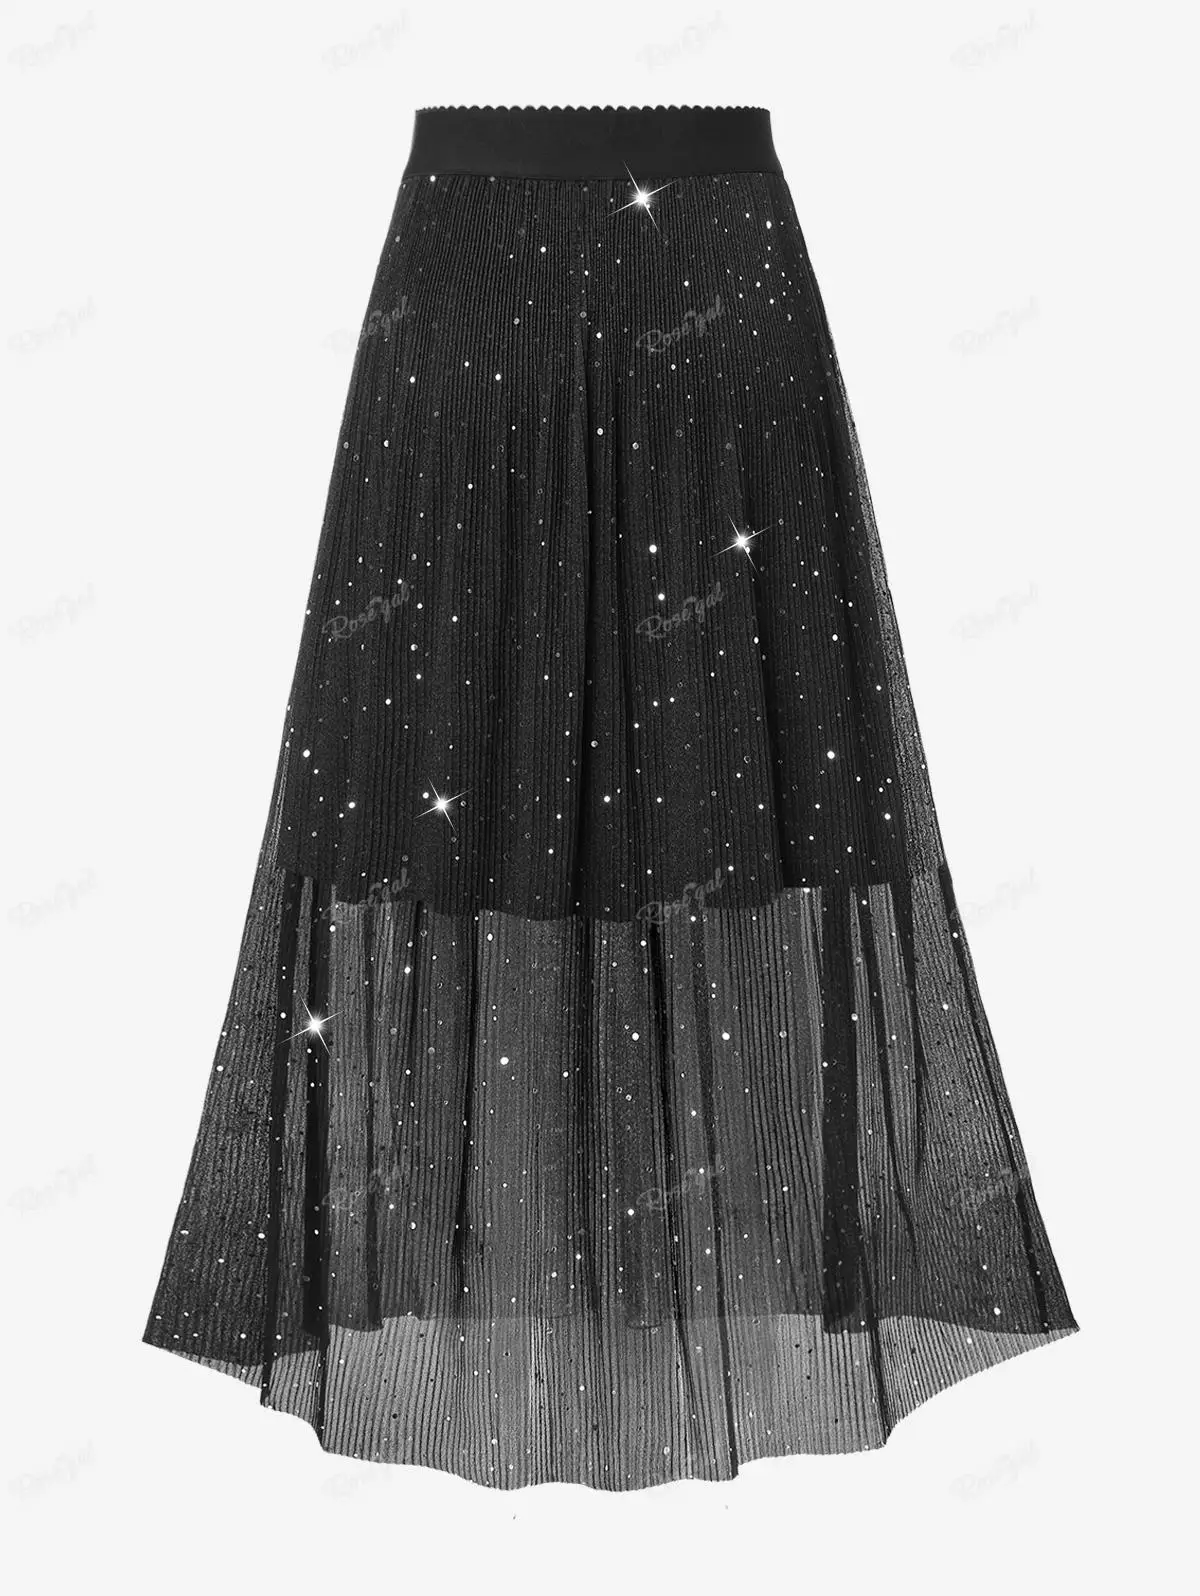 

ROSEGAL Plus Size Sequins Pleated Skirt Women Black Fashion High Waisted Double-deck Skirts Ladies Streetwear Bottoms